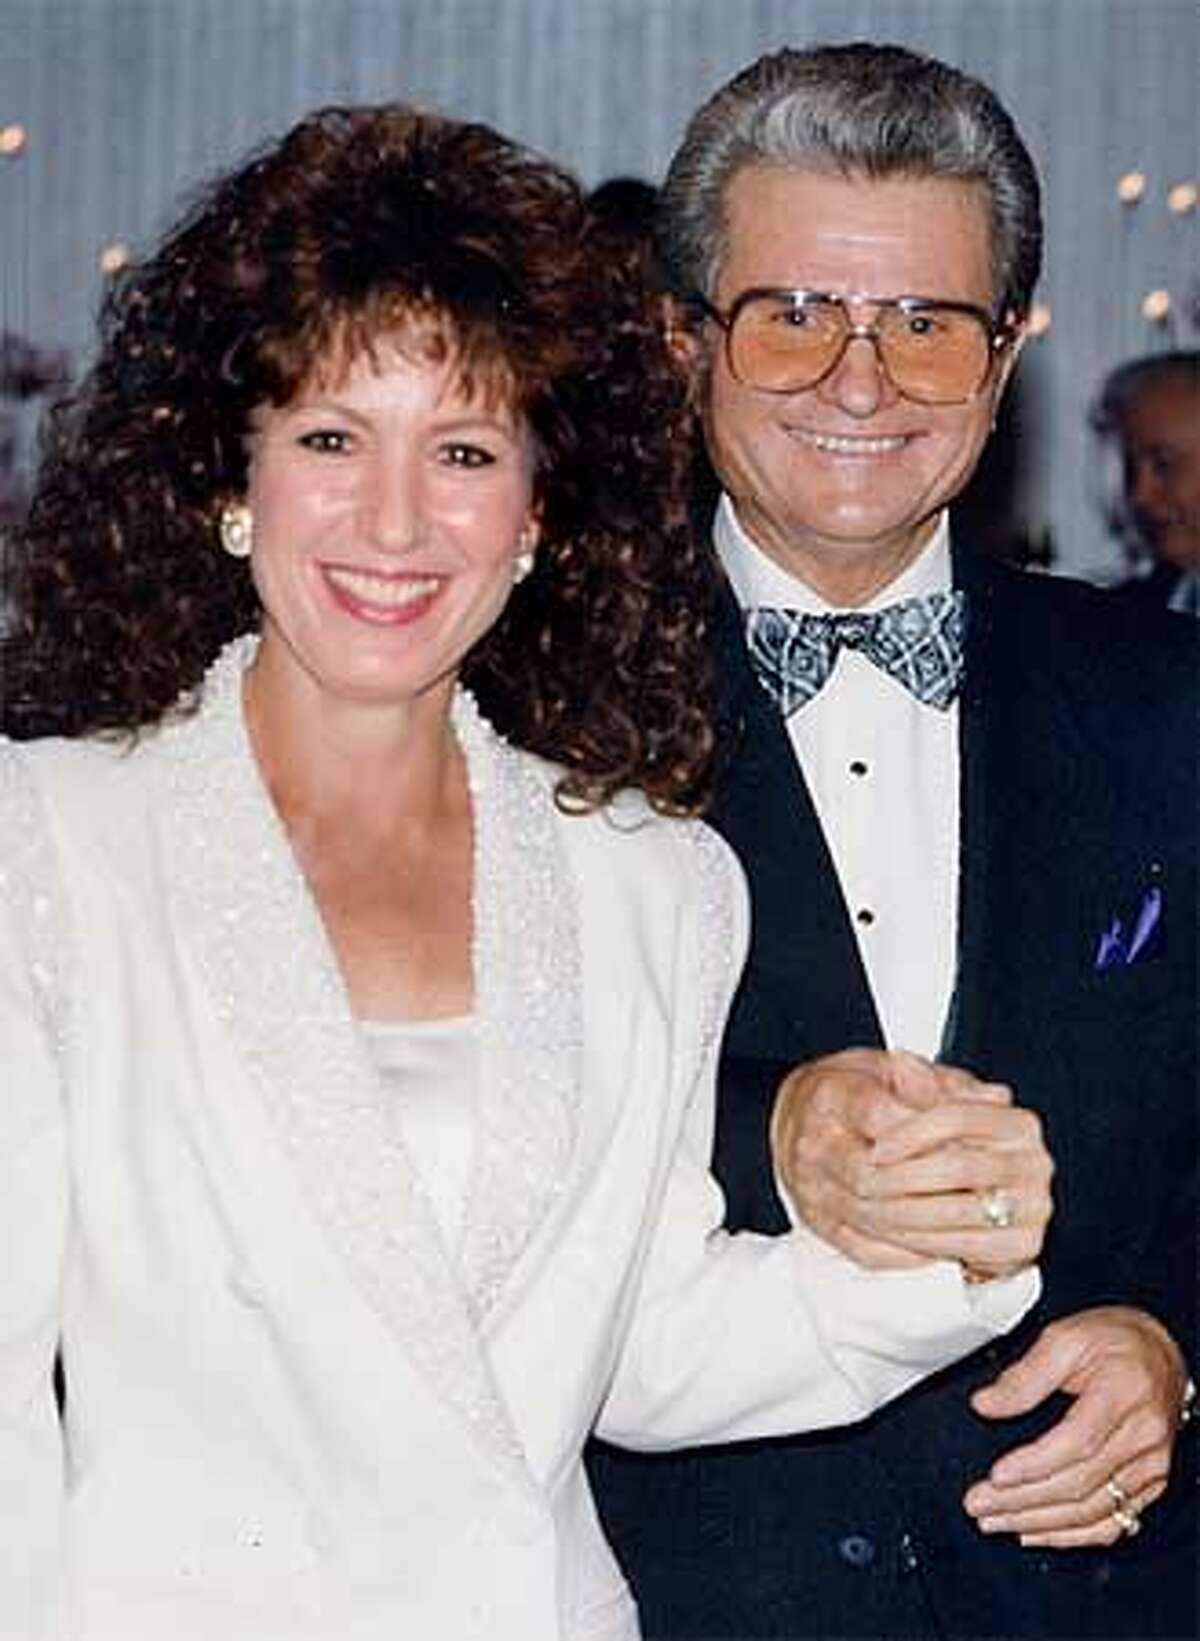 Becky and Charlie Lindquist, wedding picture October 1993.